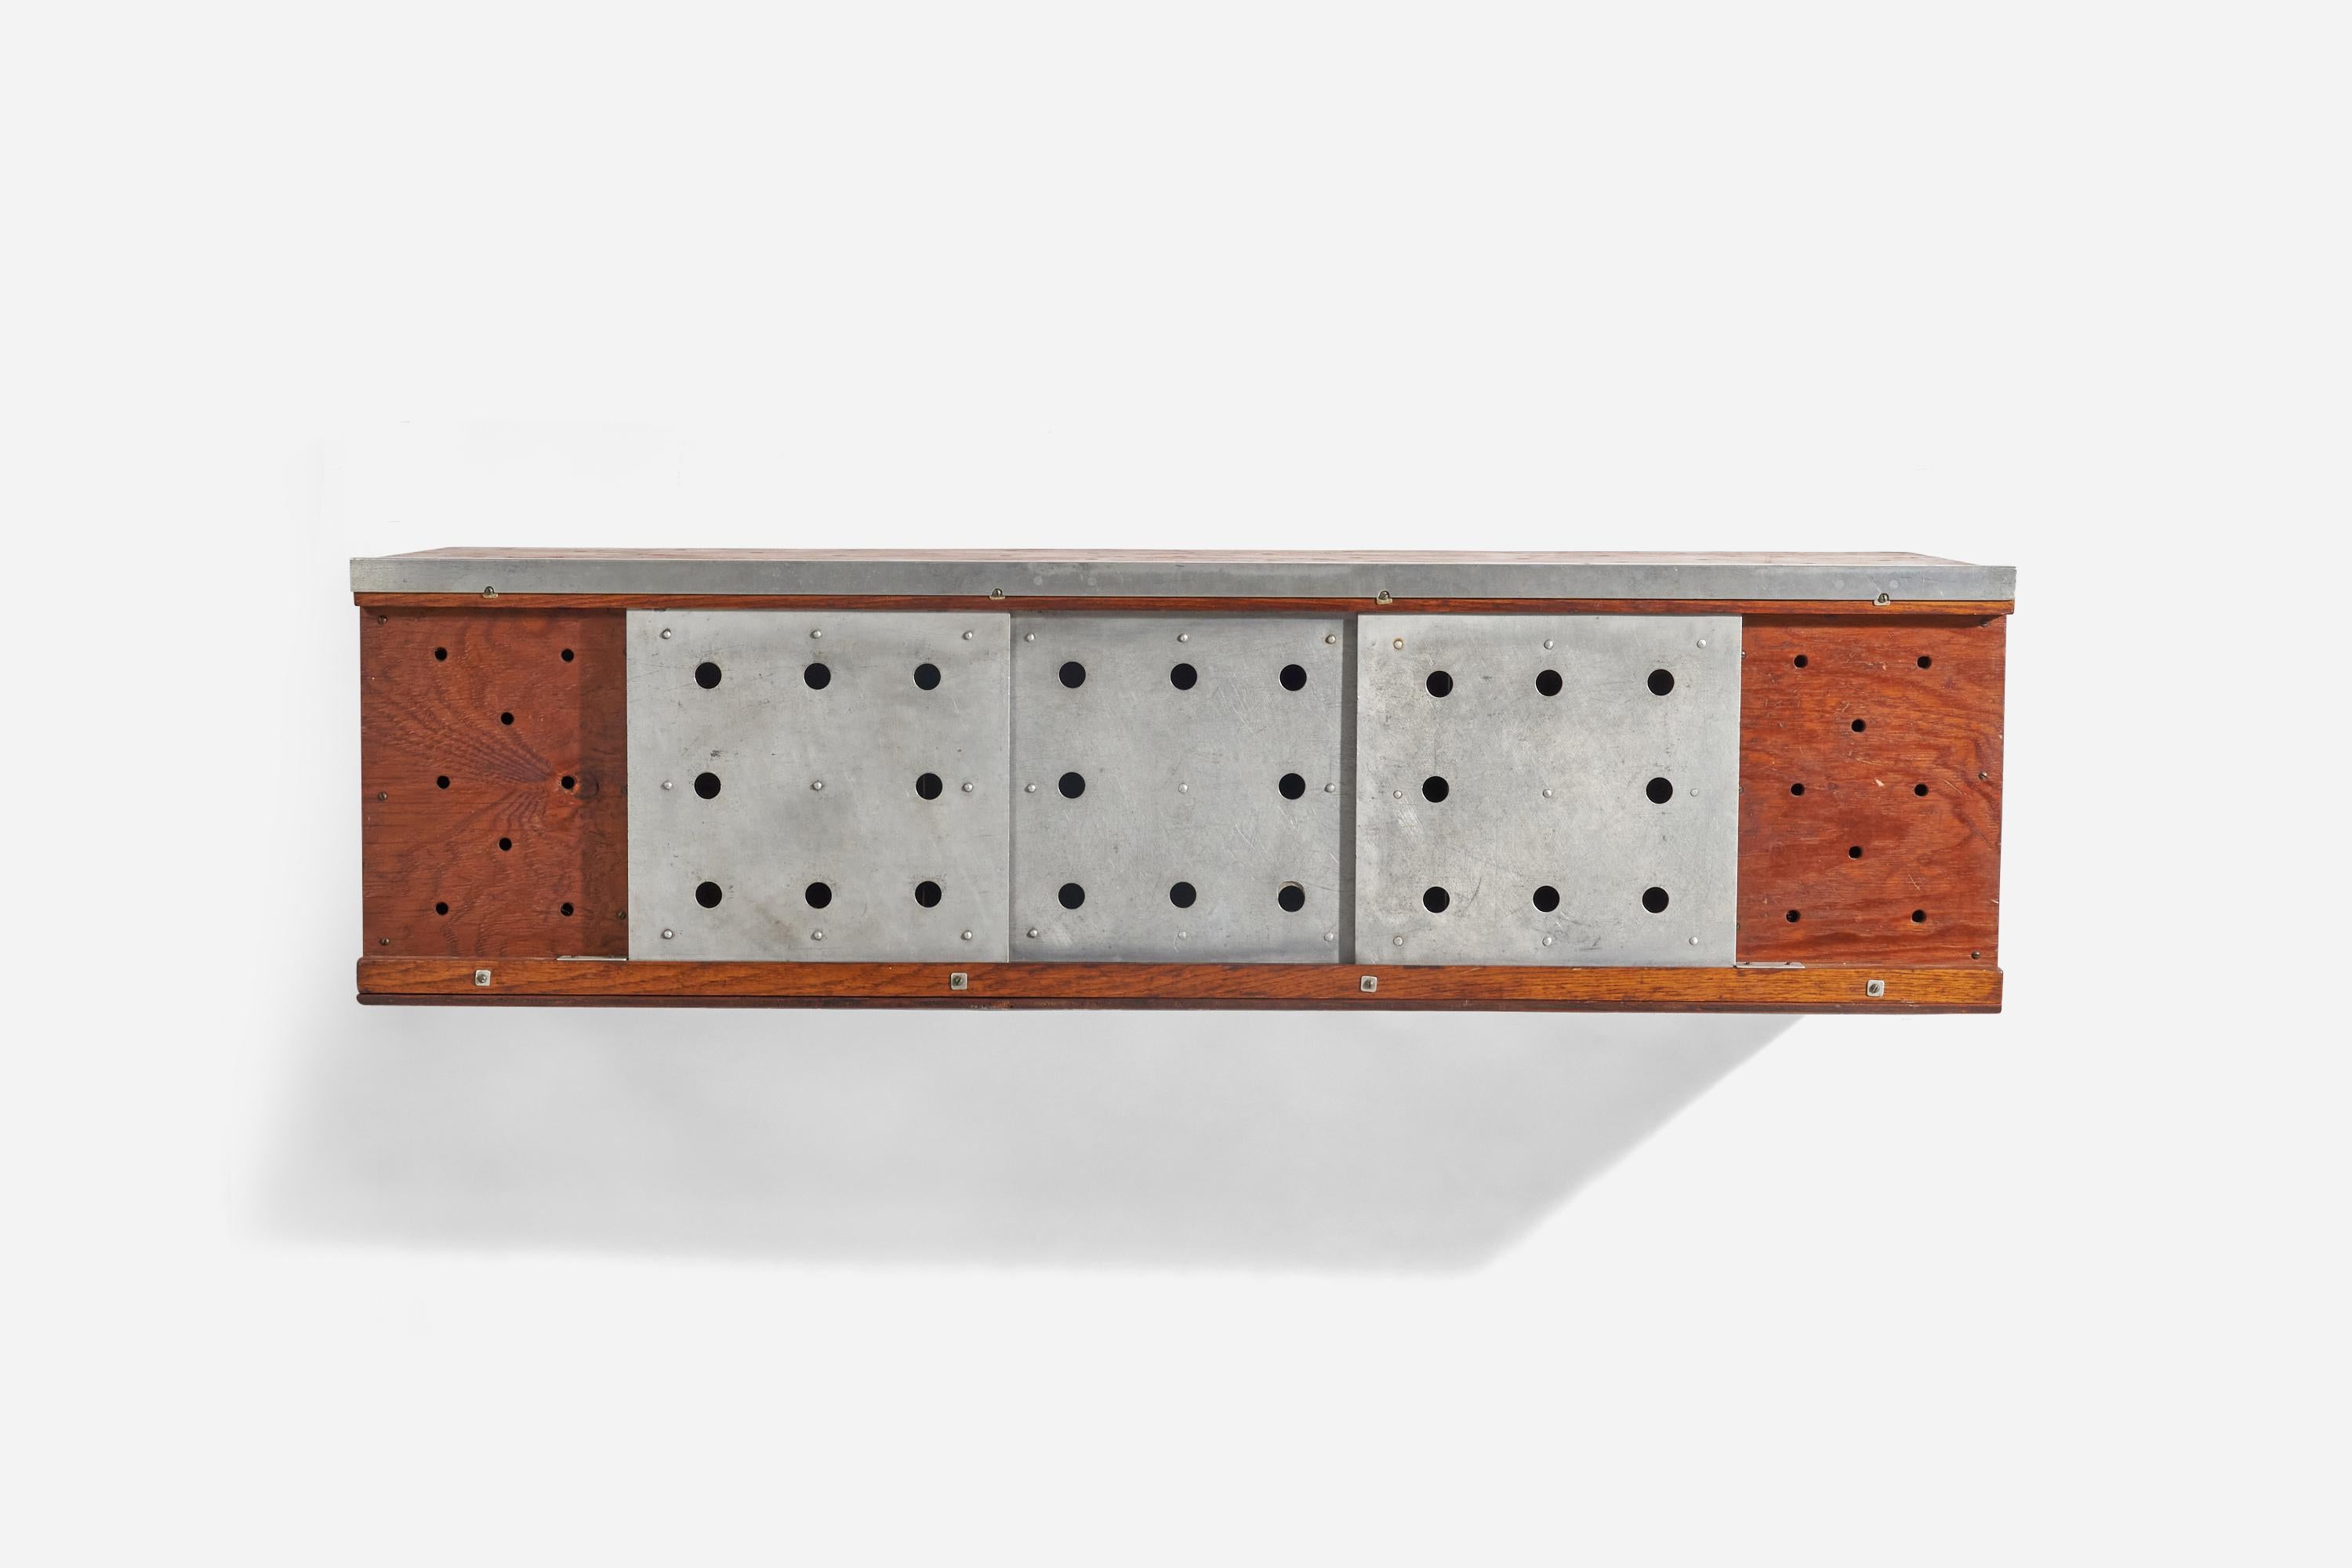 An oak and metal wall hanging cabinet designed and produced in the United States, 1960s.